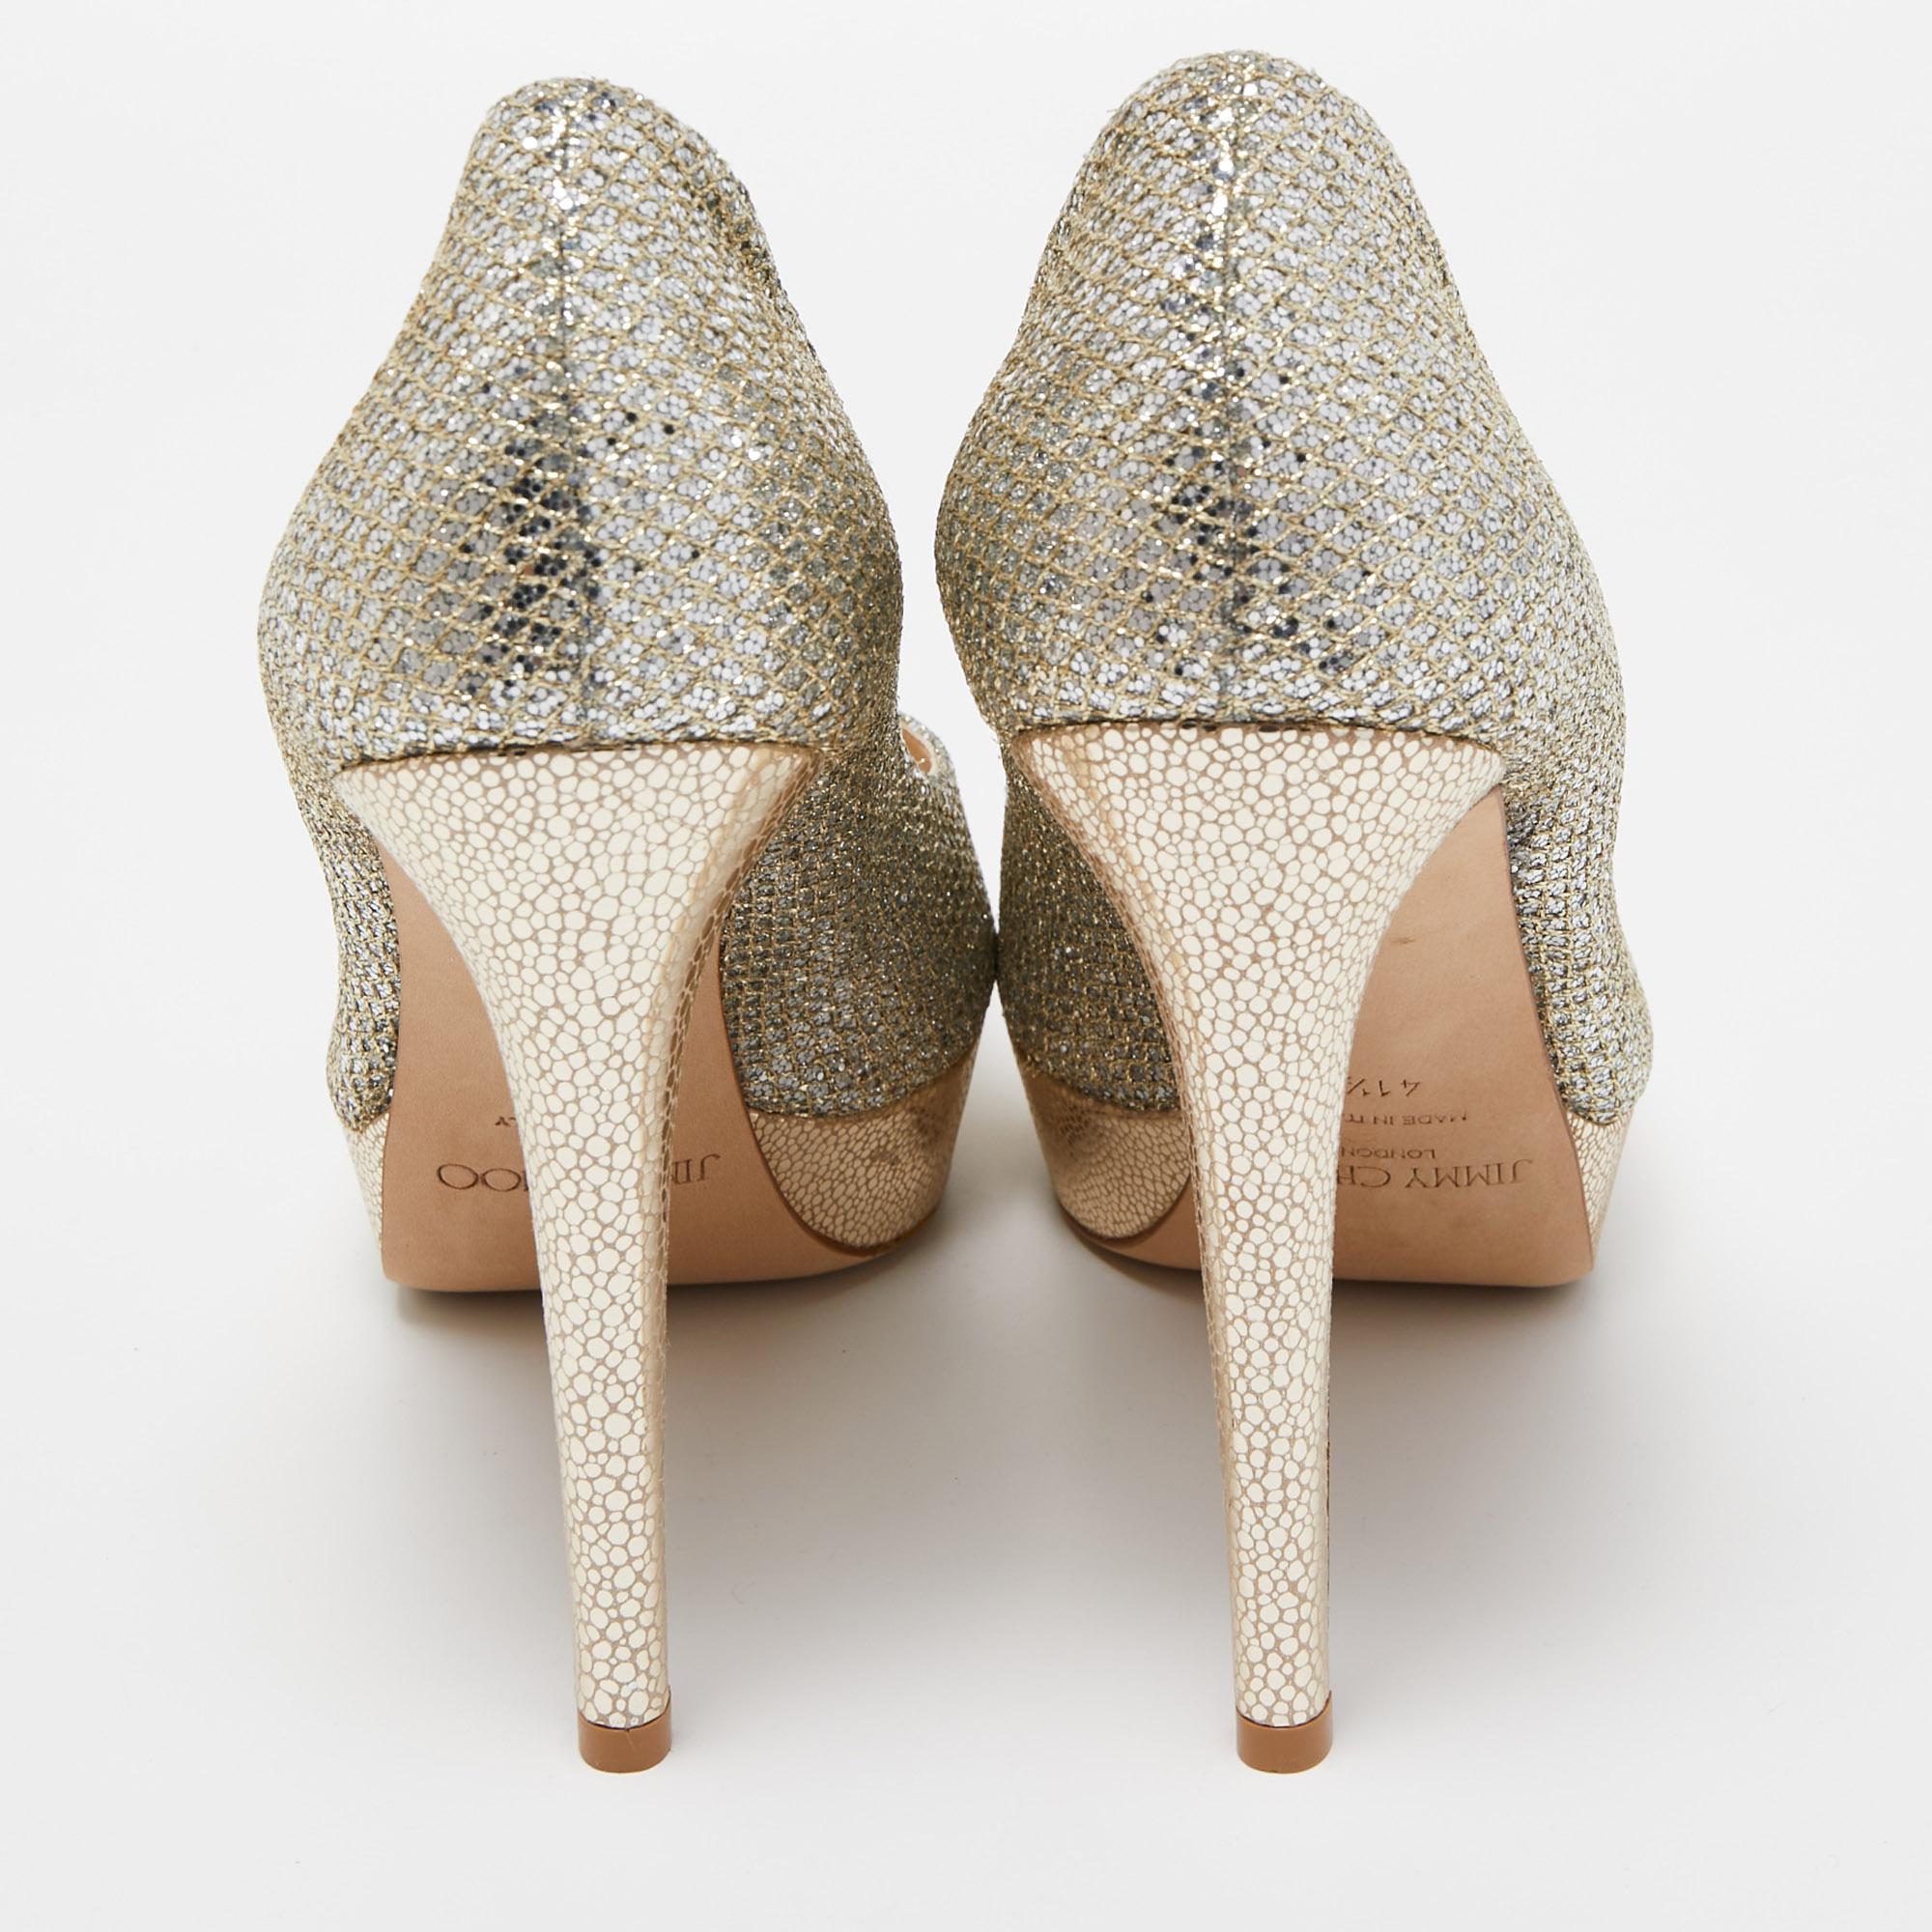 Beige Jimmy Choo Gold/Silver Glitter and Leather Dahlia Peep Toe Pumps Size 41.5